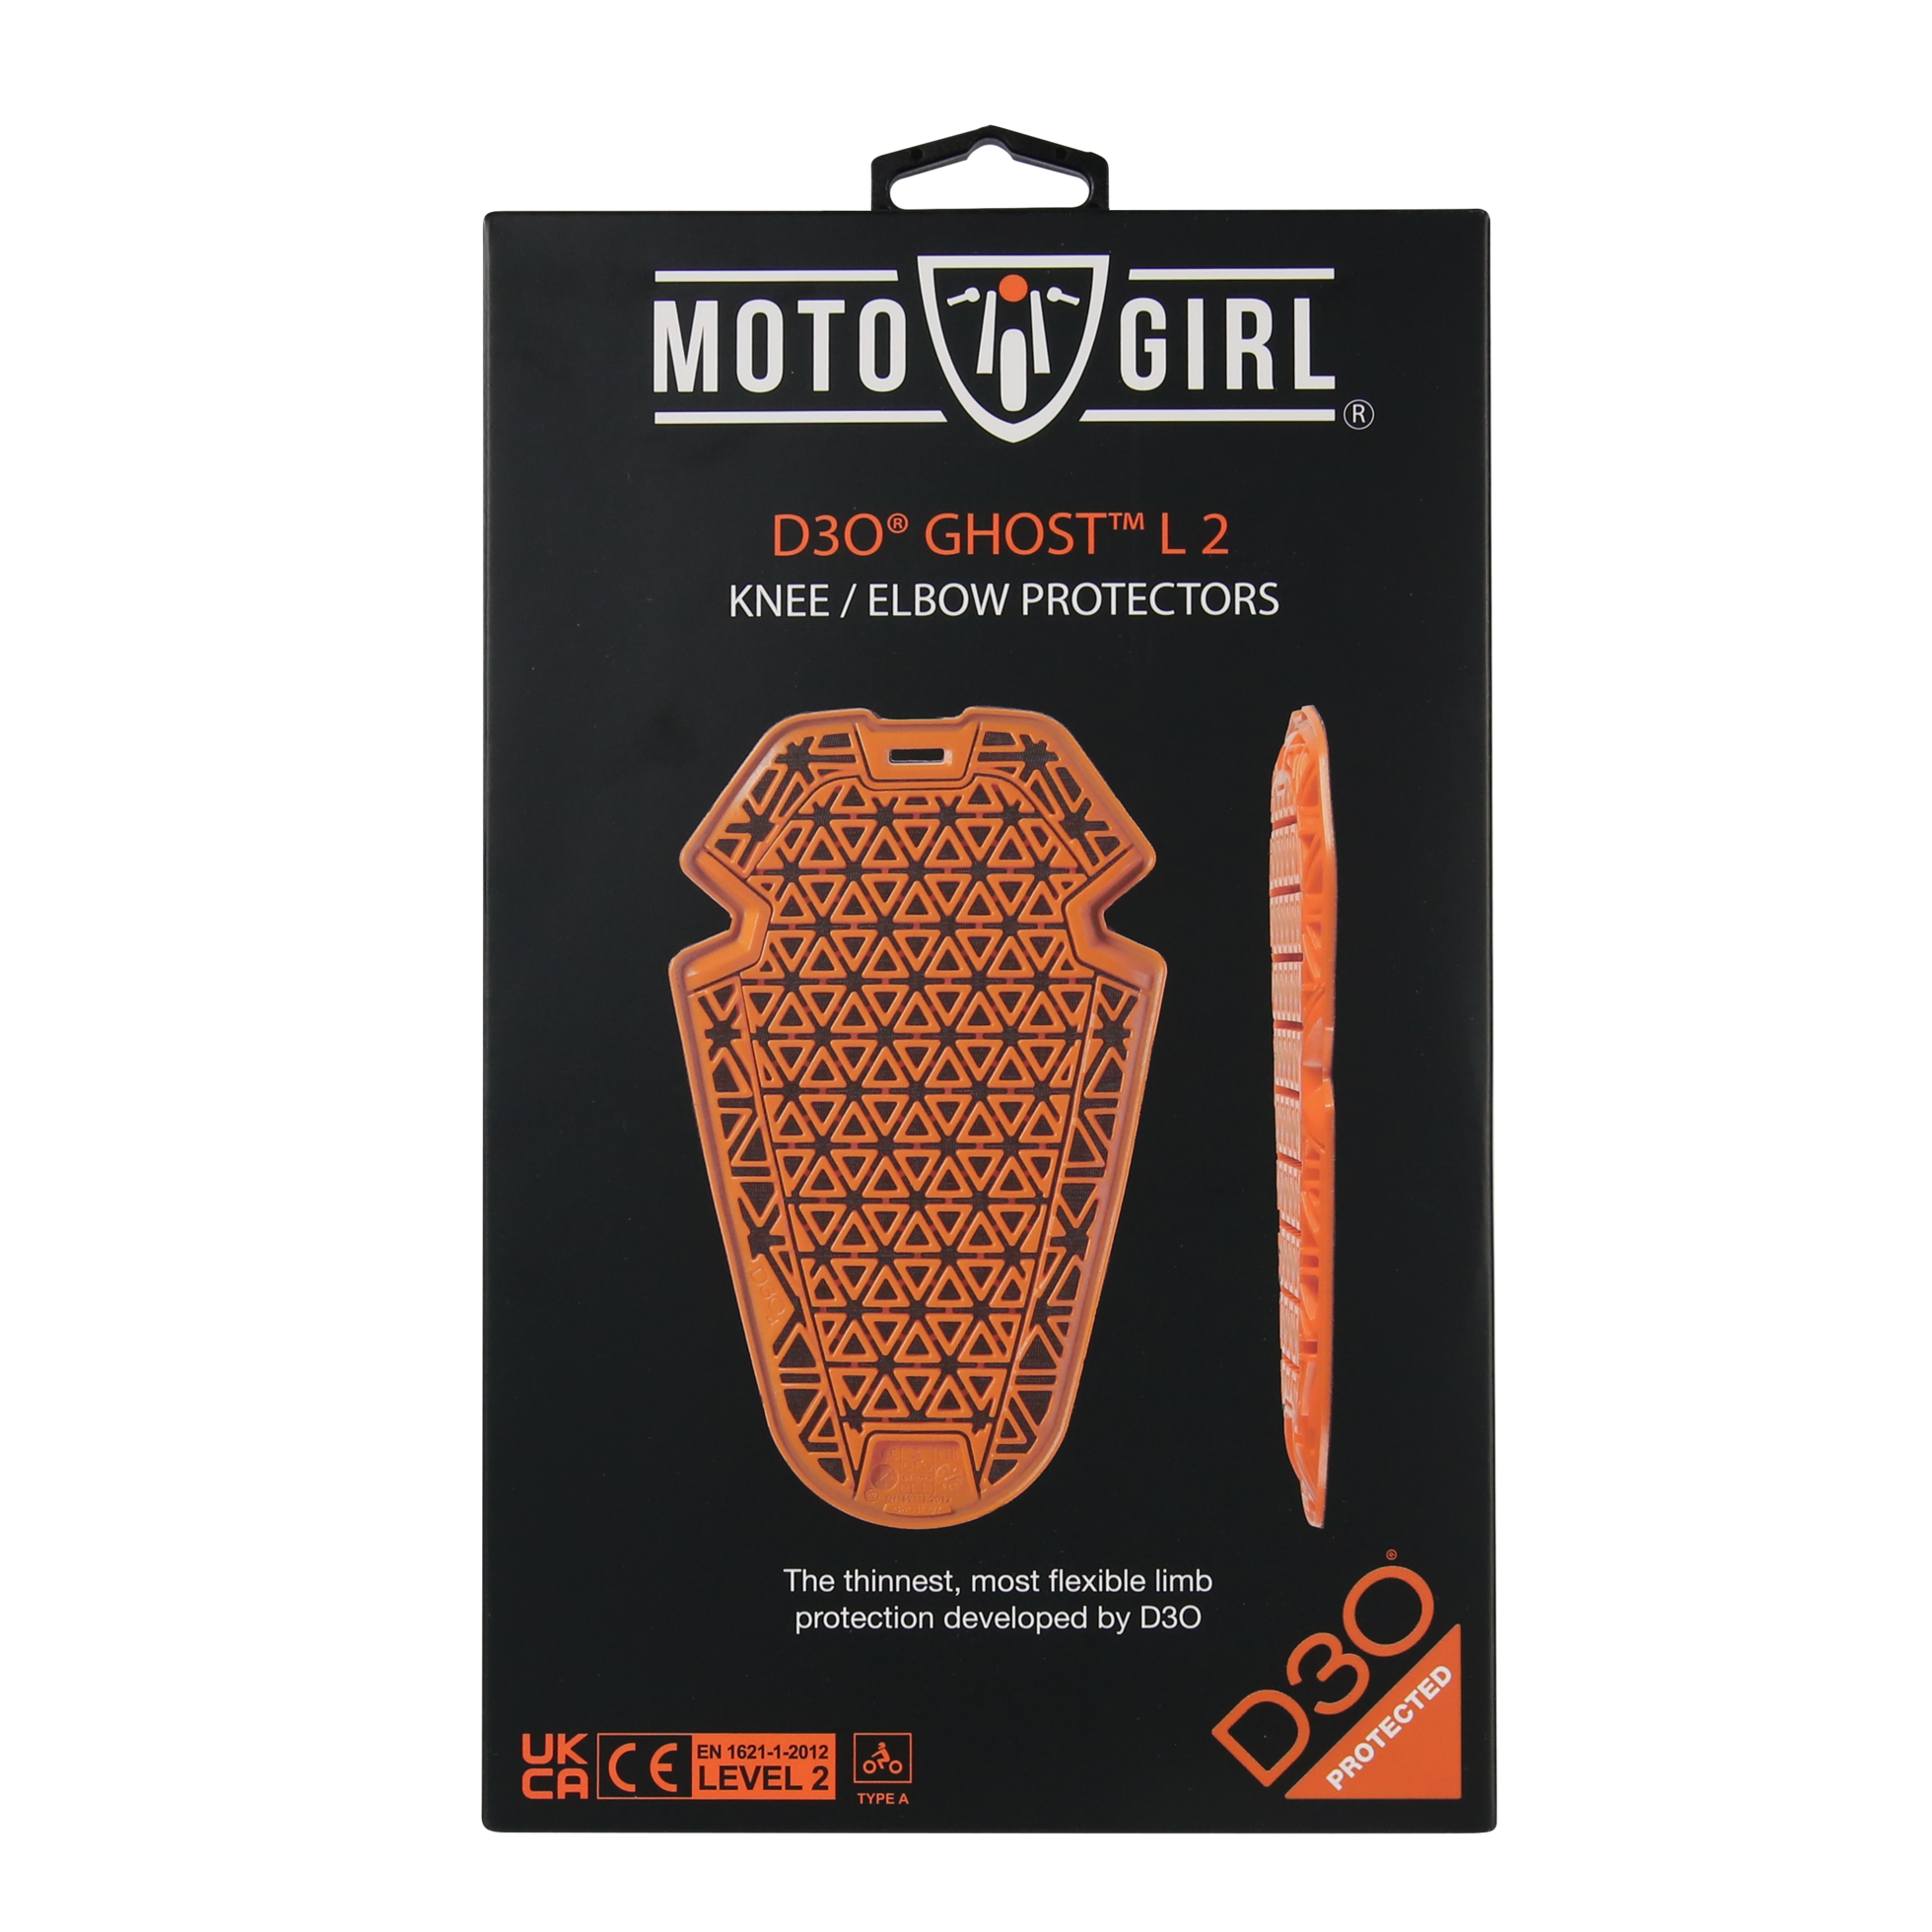 A pack of orange D30 ghost LEVEL 2 knee and elbow protectors from MotoGirl